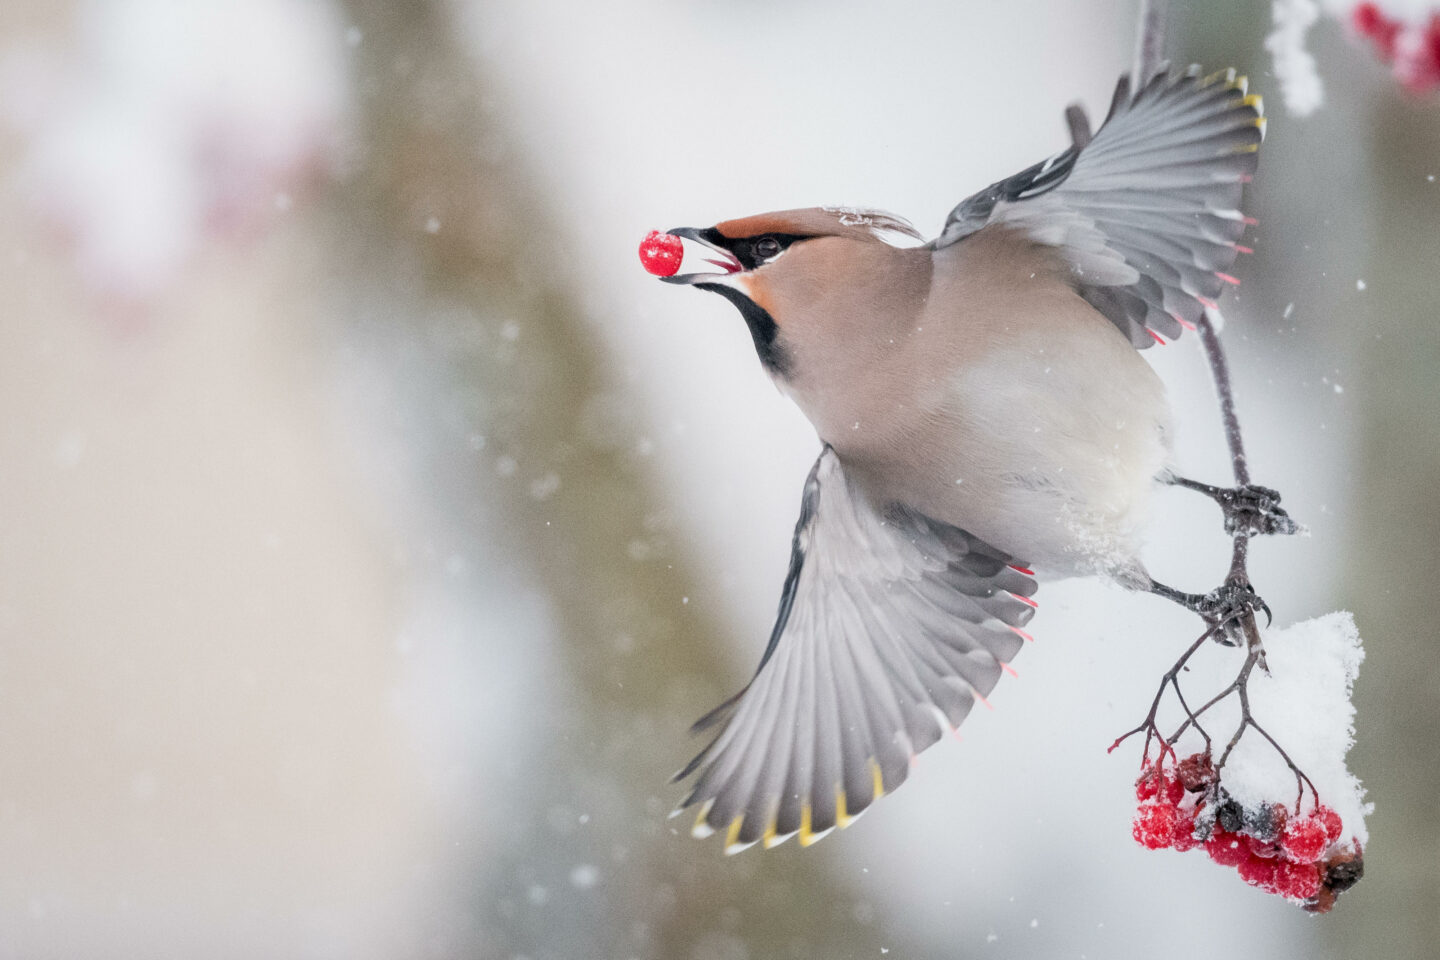 A white bird with wings spread holding a tiny red berry in it's mouth. It is holding onto a branch with more berries. The background is blurred but it's snowing.